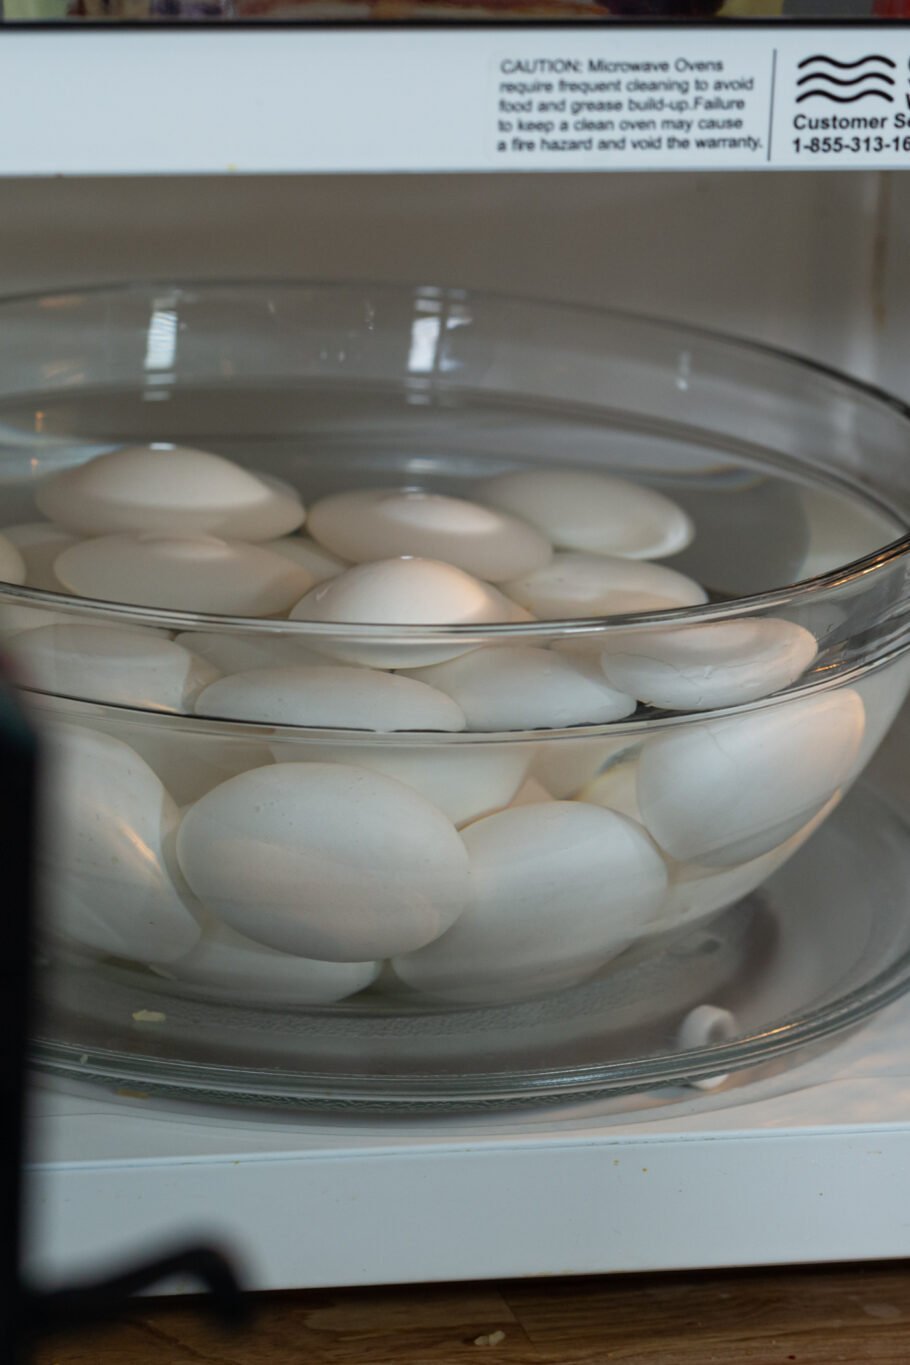 How to Make Hard Boiled Eggs in the Oven (& VIDEO!) - Baked Eggs